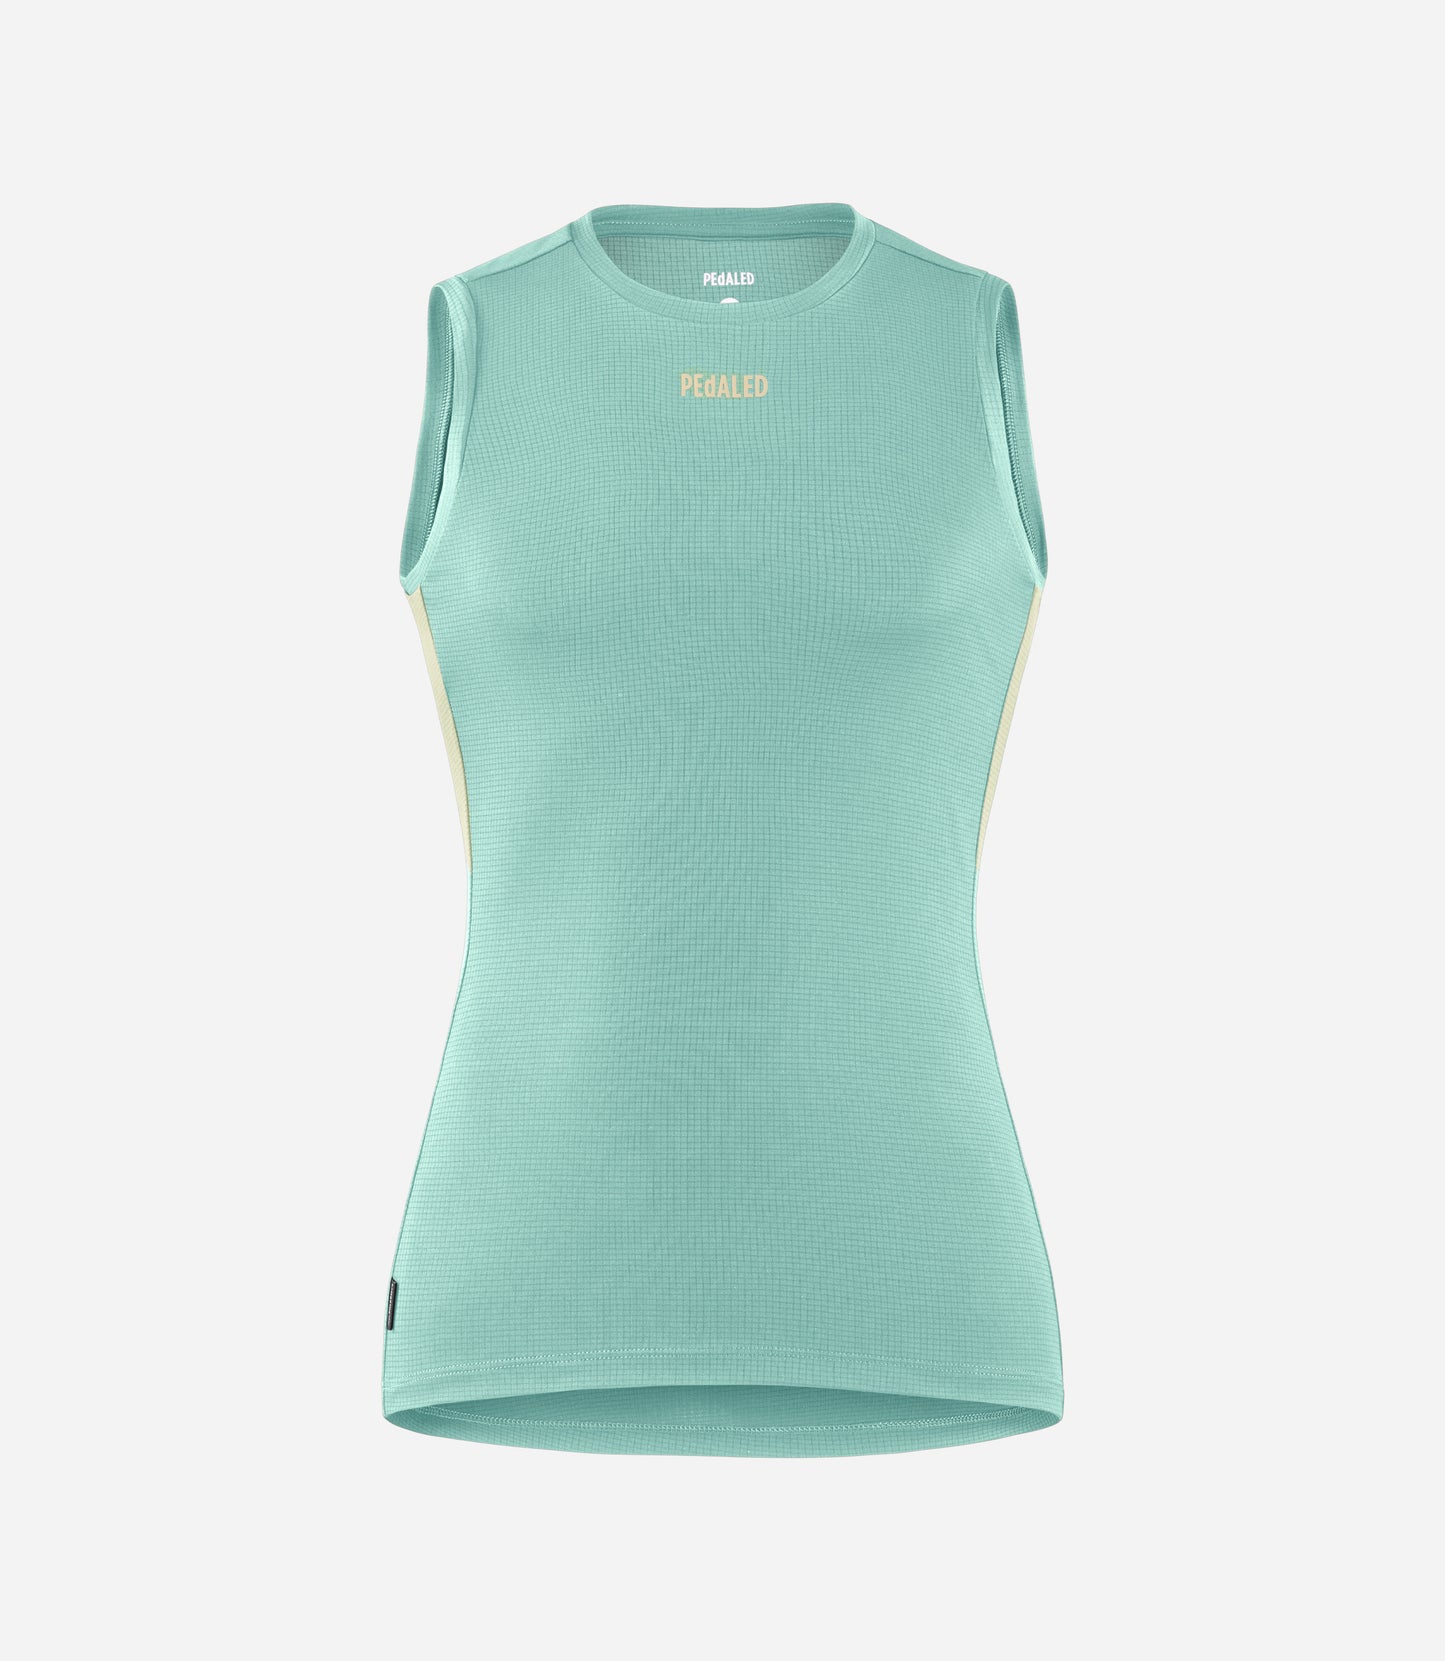 W4SBLOD37PE_1_women base layer powerdry light green odyssey front pedaled